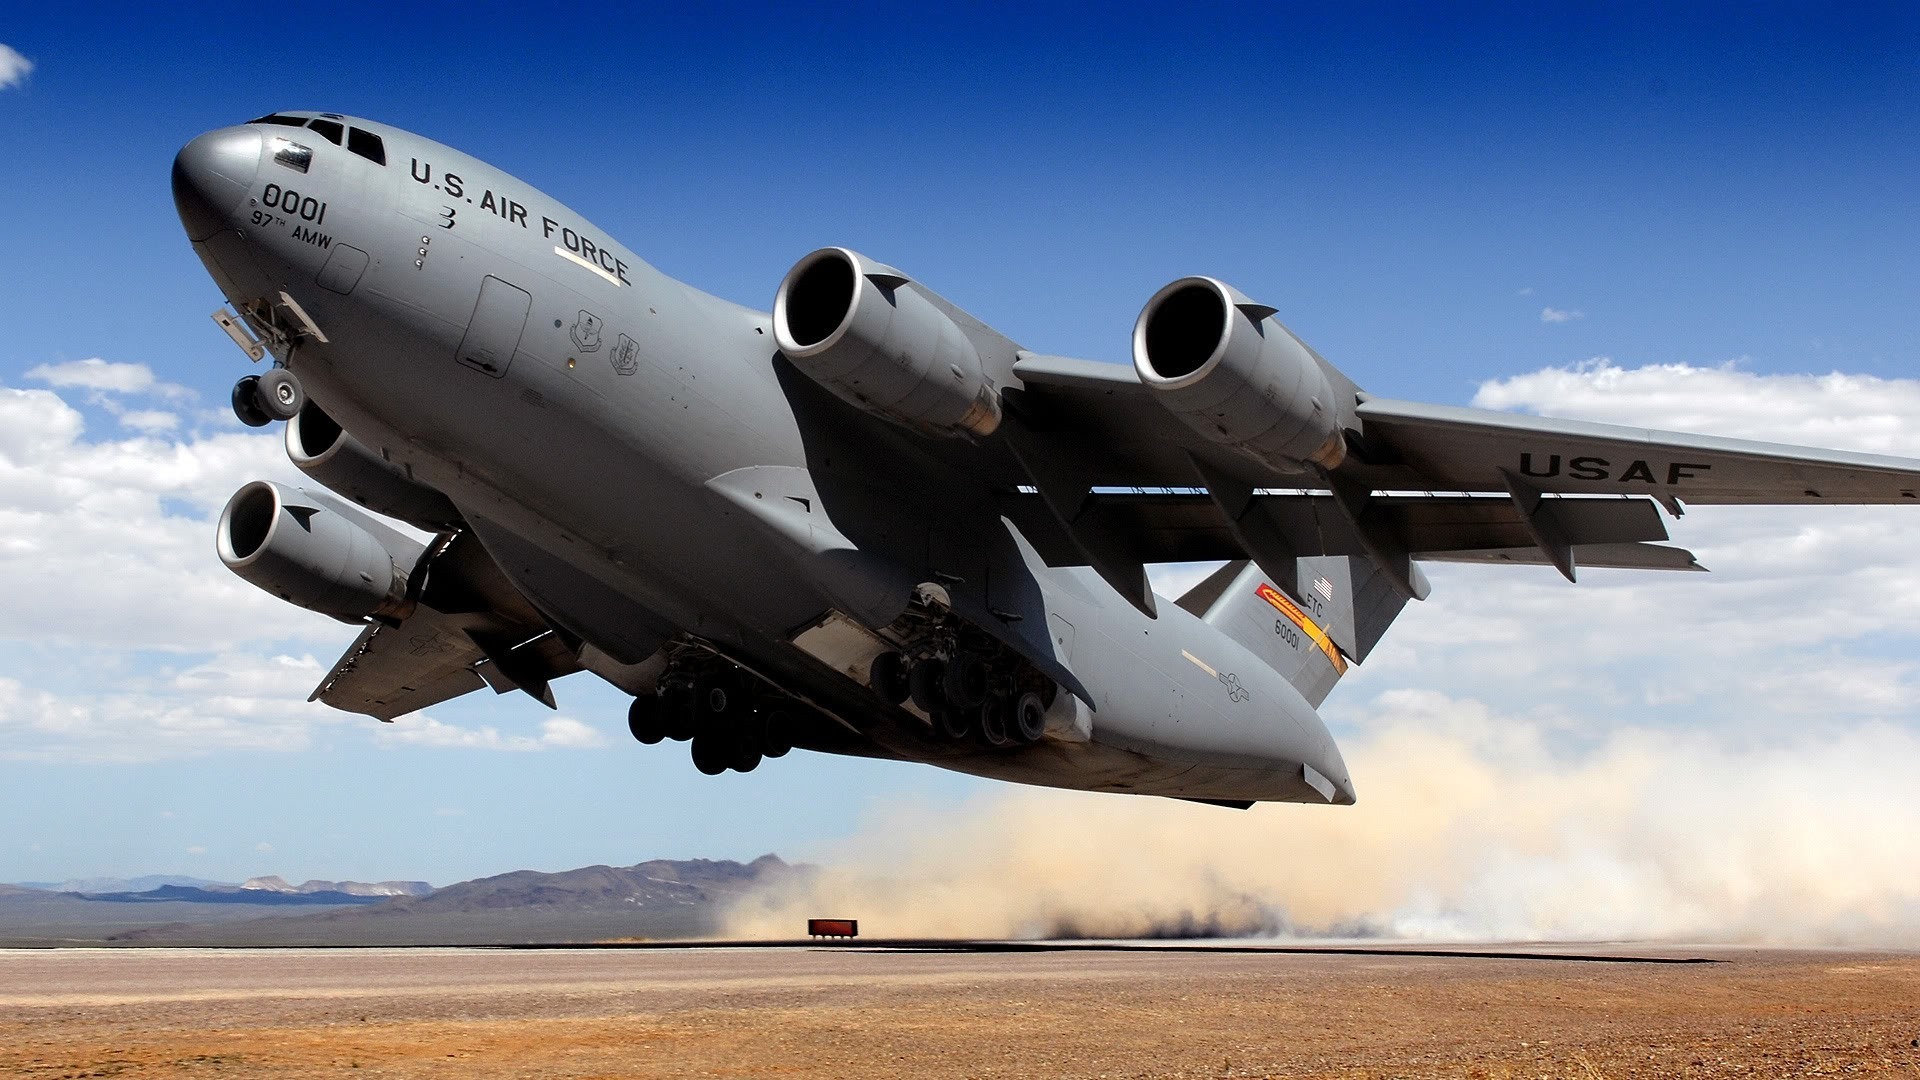 General 1920x1080 airplane aircraft military aircraft vehicle US Air Force military vehicle military Boeing C-17 Globemaster III take-off dust American aircraft Boeing